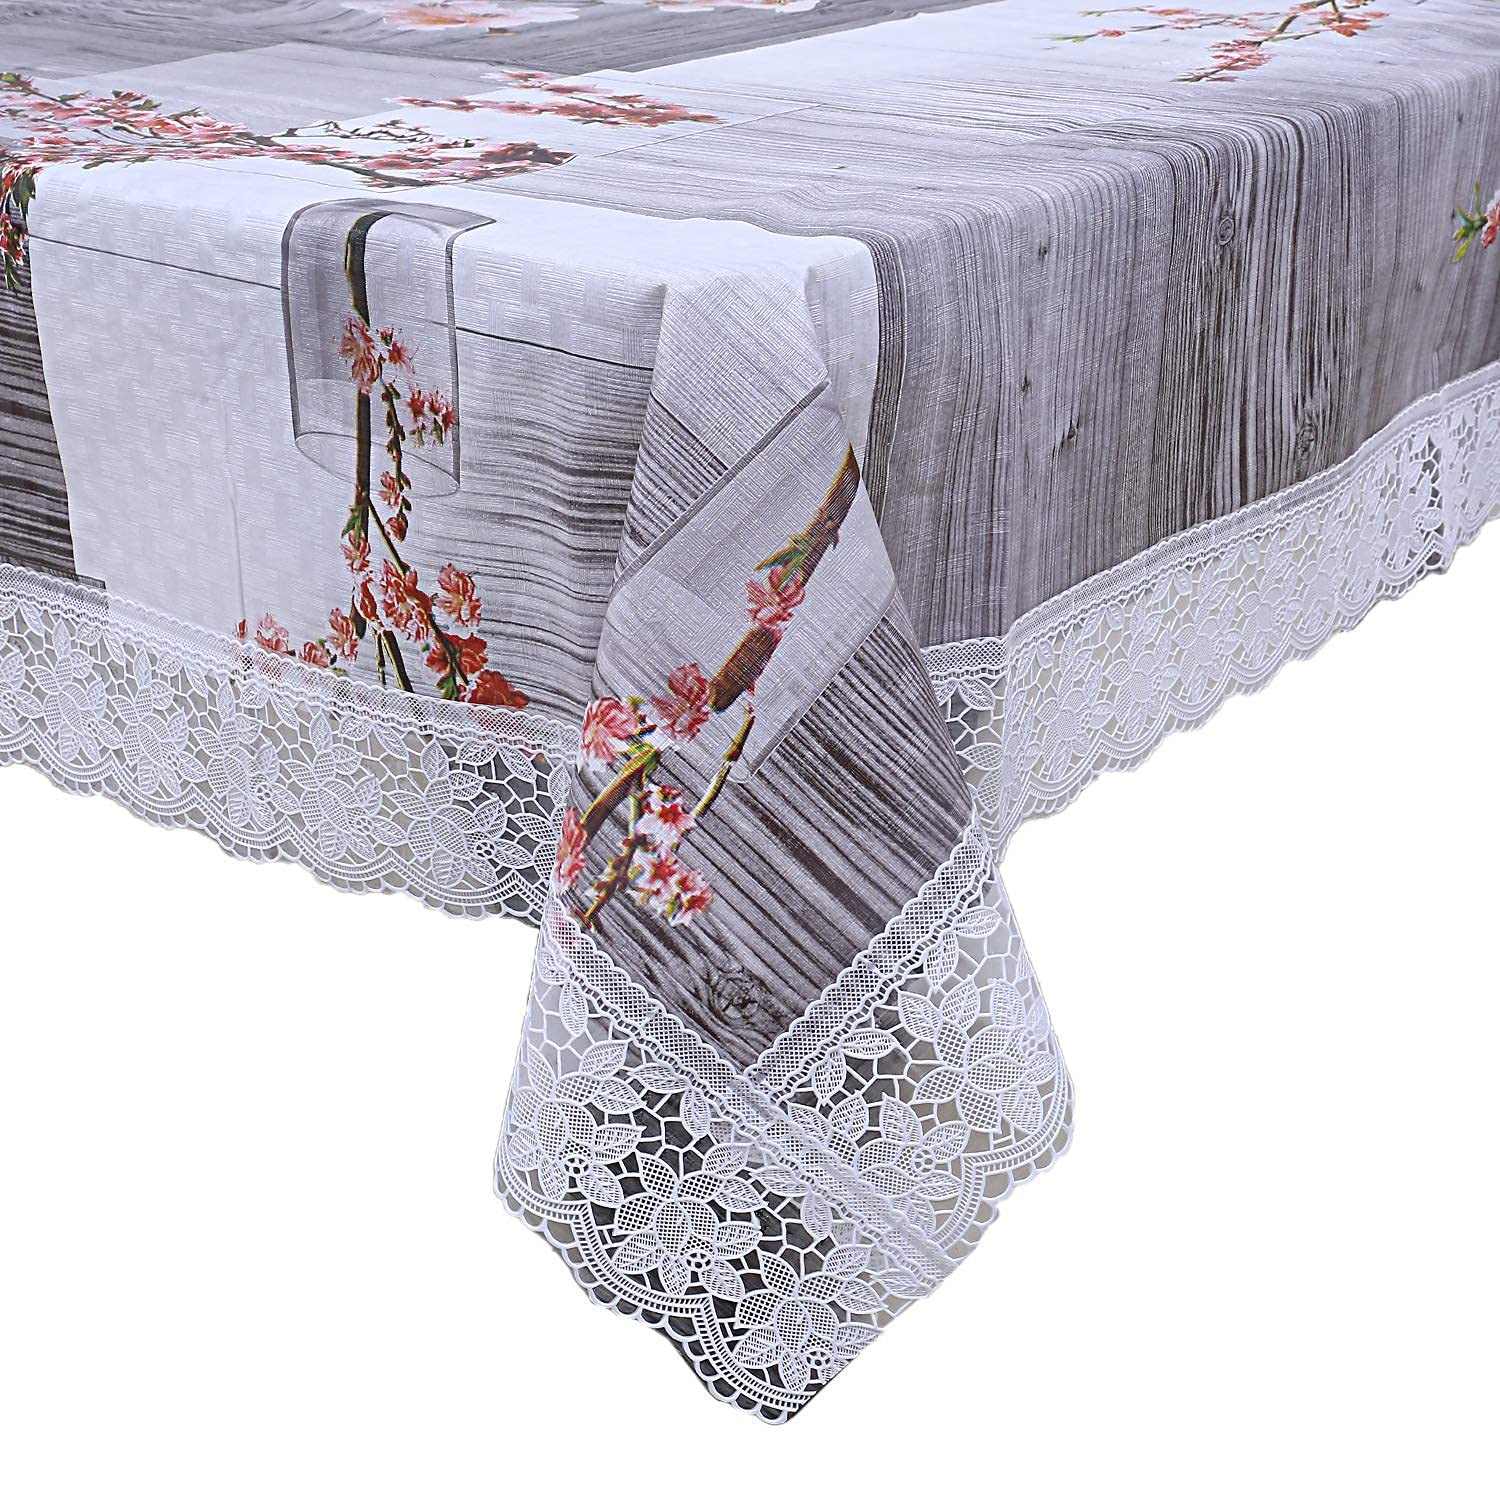 Kuber Industries Floral Checkered Design PVC 4 Seater Centre Table Cover (Grey) -CTKTC014355, Standard